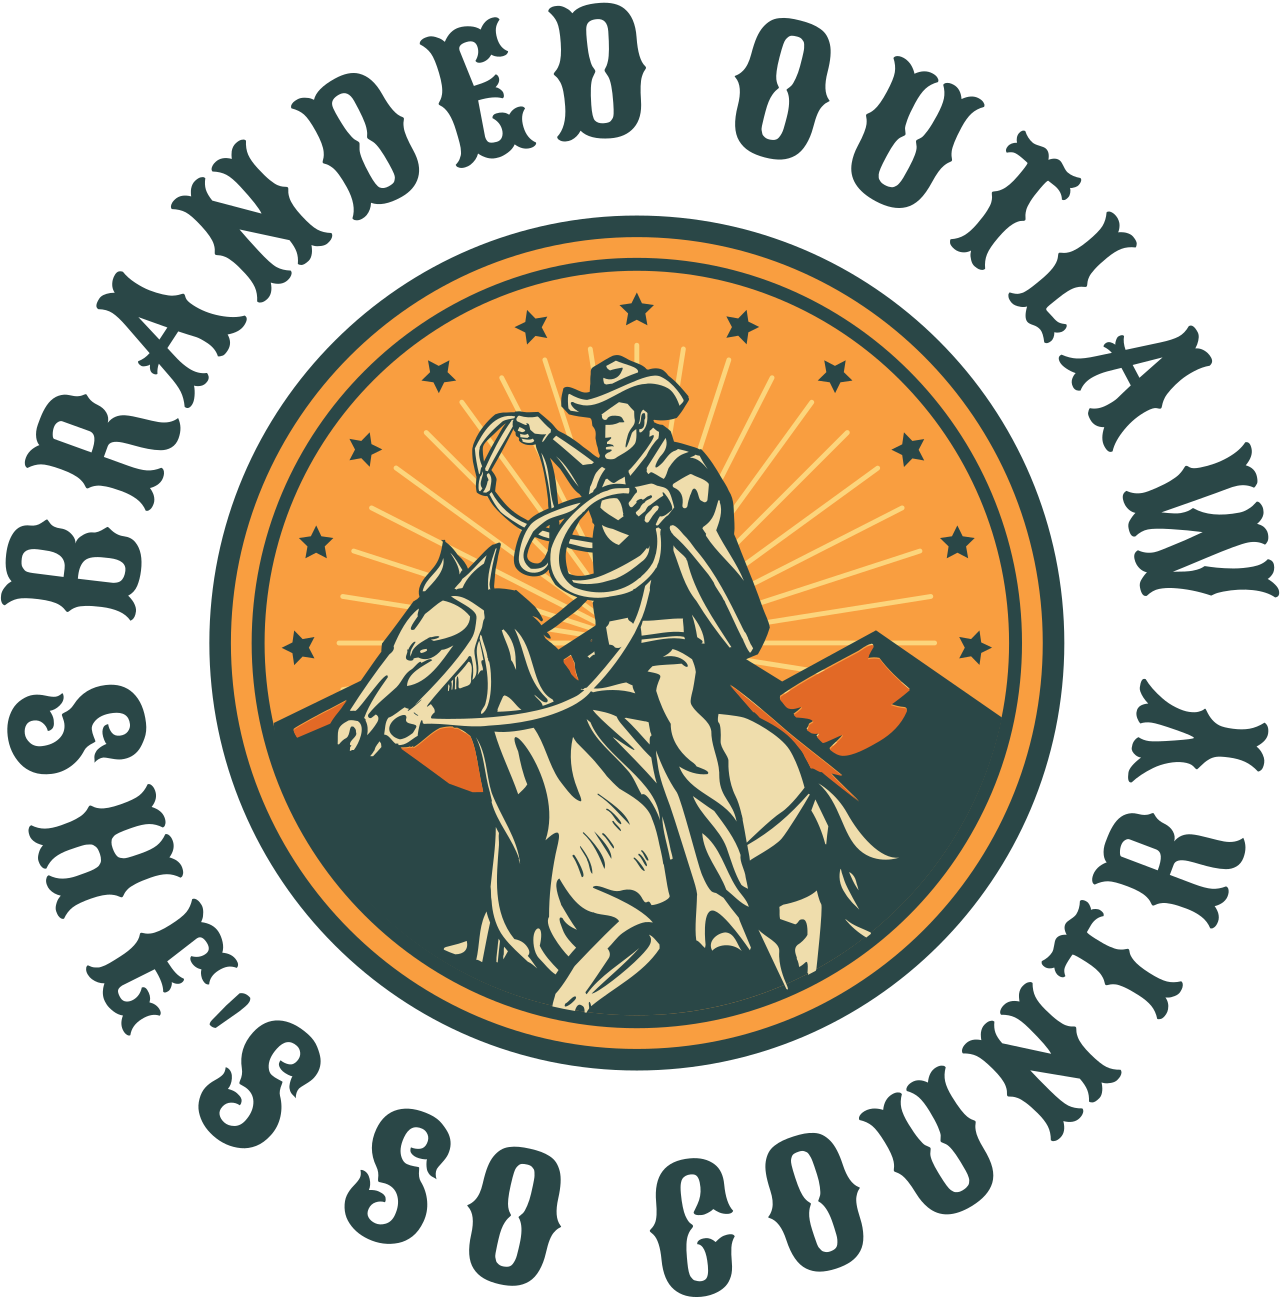 BRANDED OUTLAW's web page